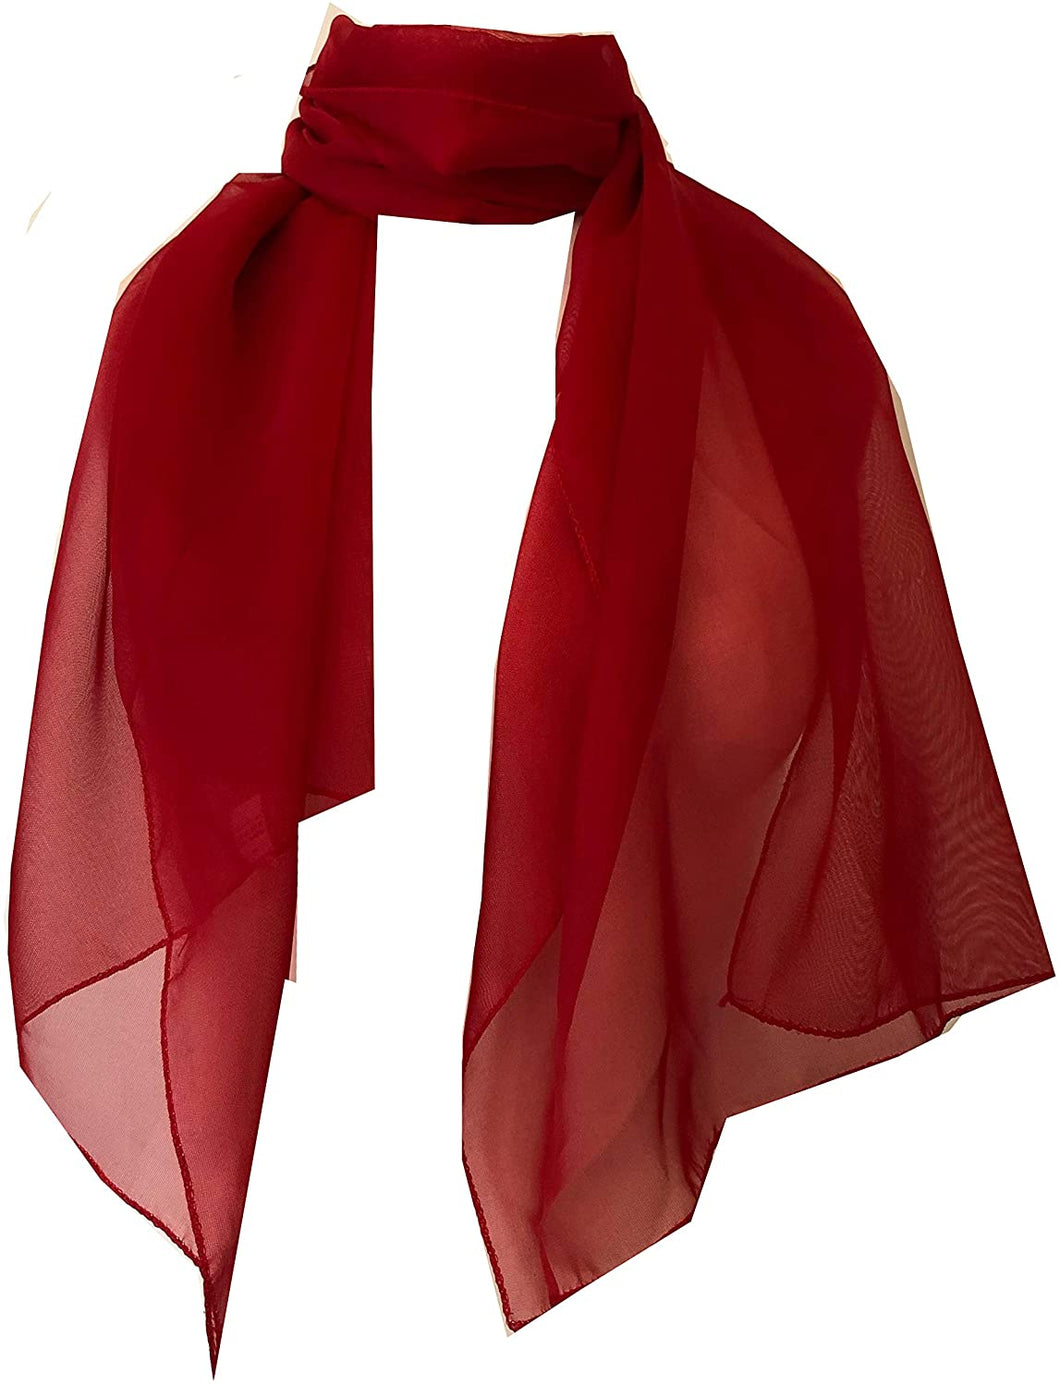 Plain red Chiffon Style Scarf Thin Pretty Scarf Great for Any Outfit Lovely Gift